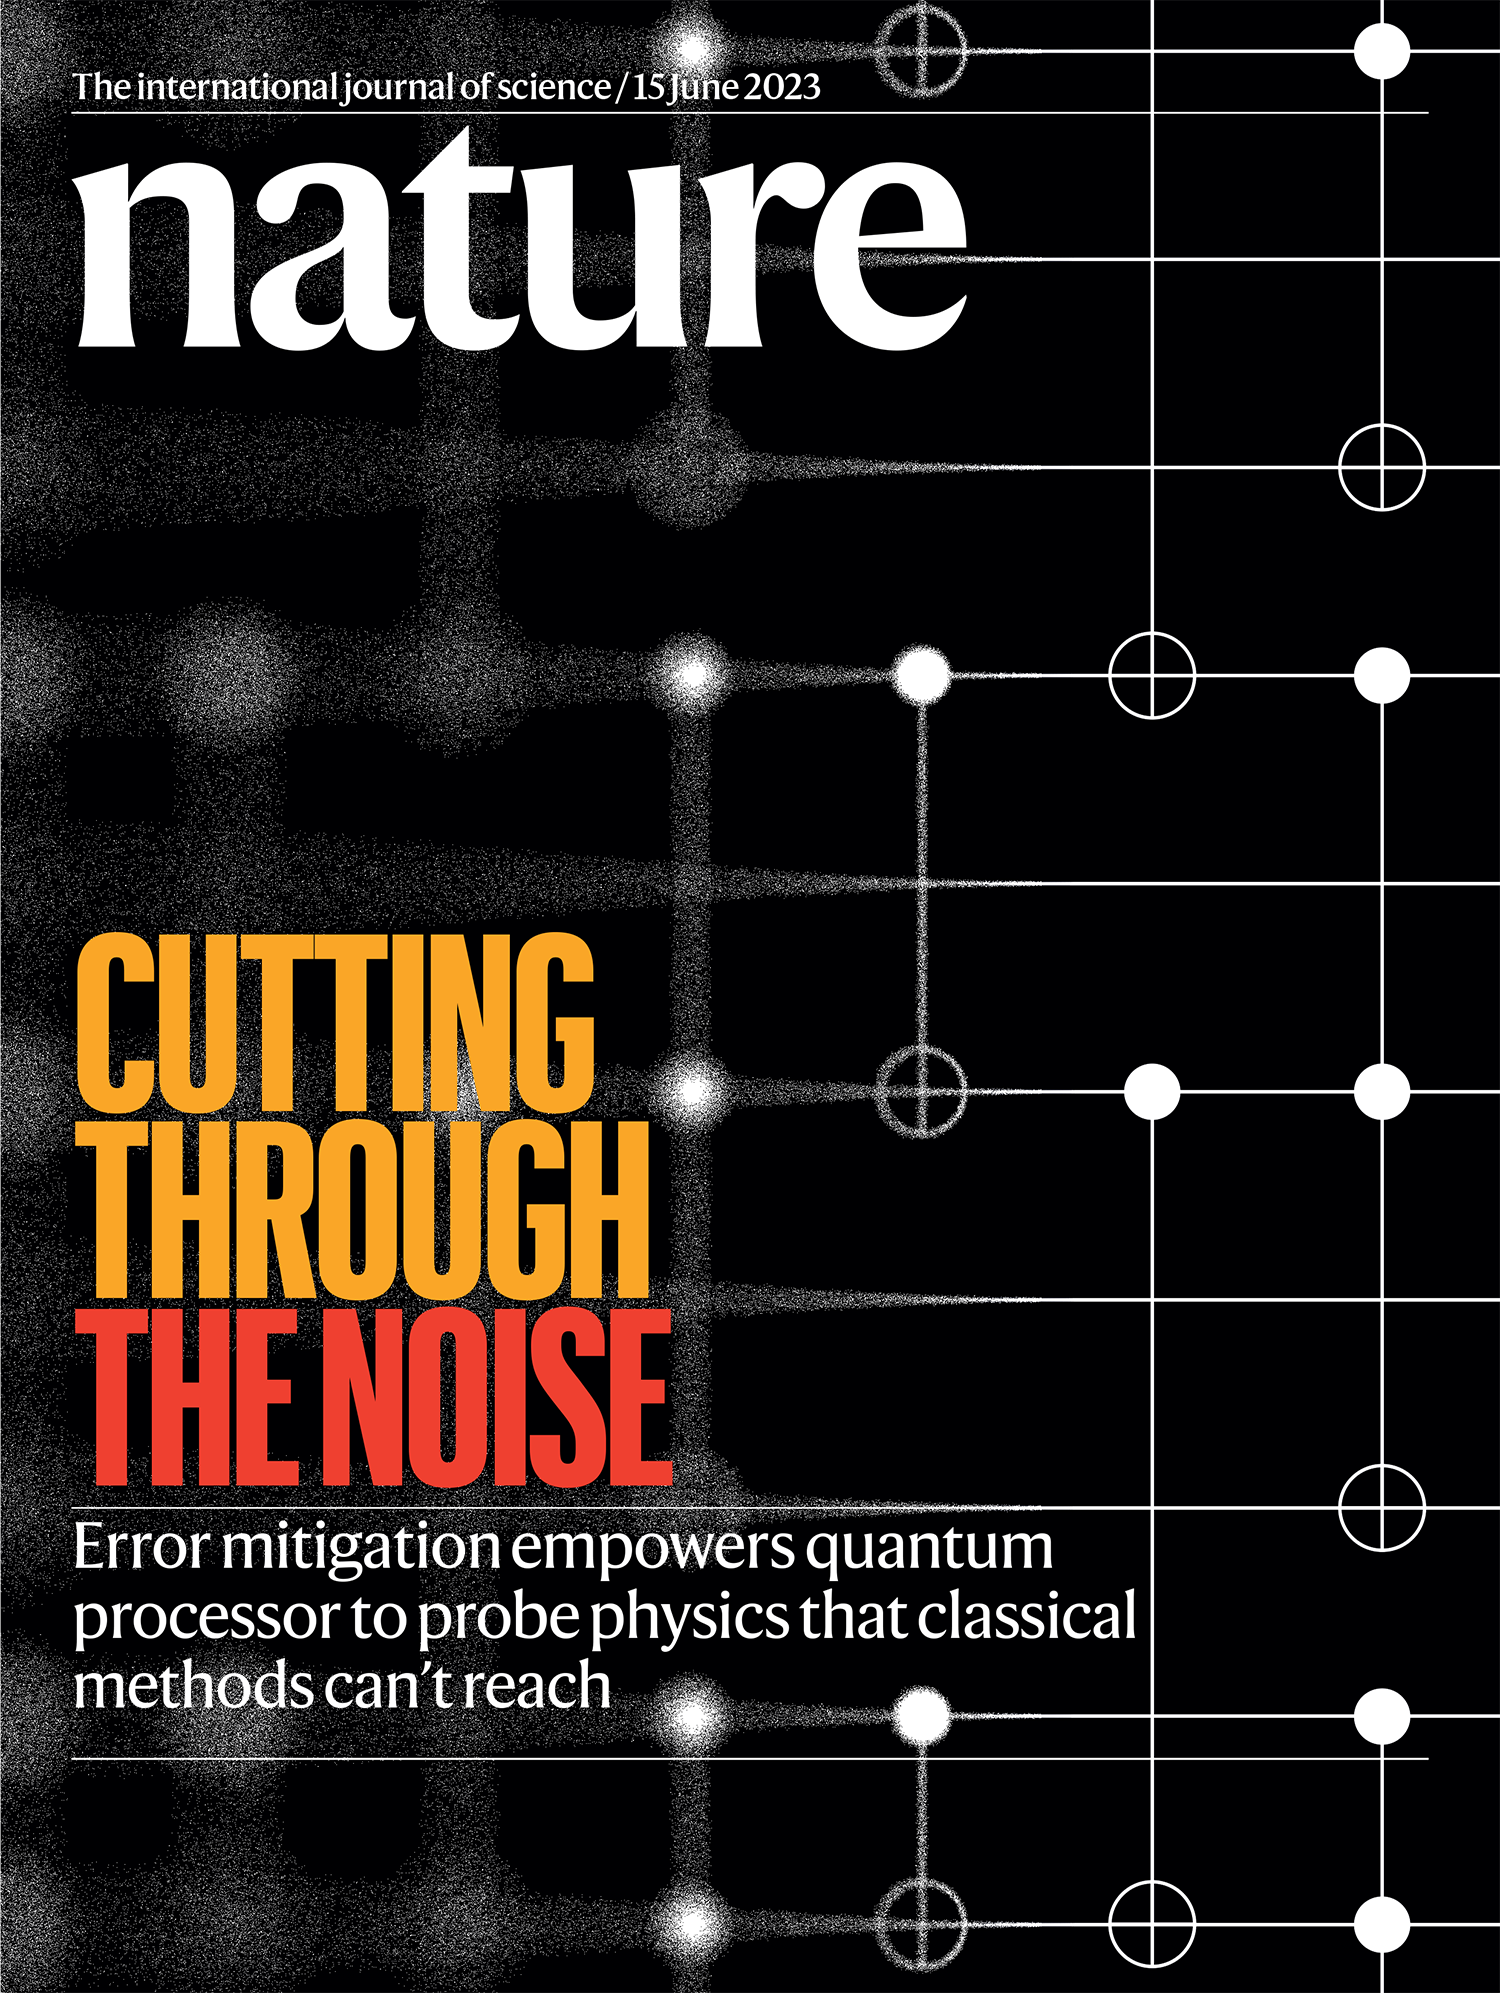 The journal Nature featured the article “Evidence for the use of quantum computing before fault tolerance” on the cover of their June 15, 2023 issue.